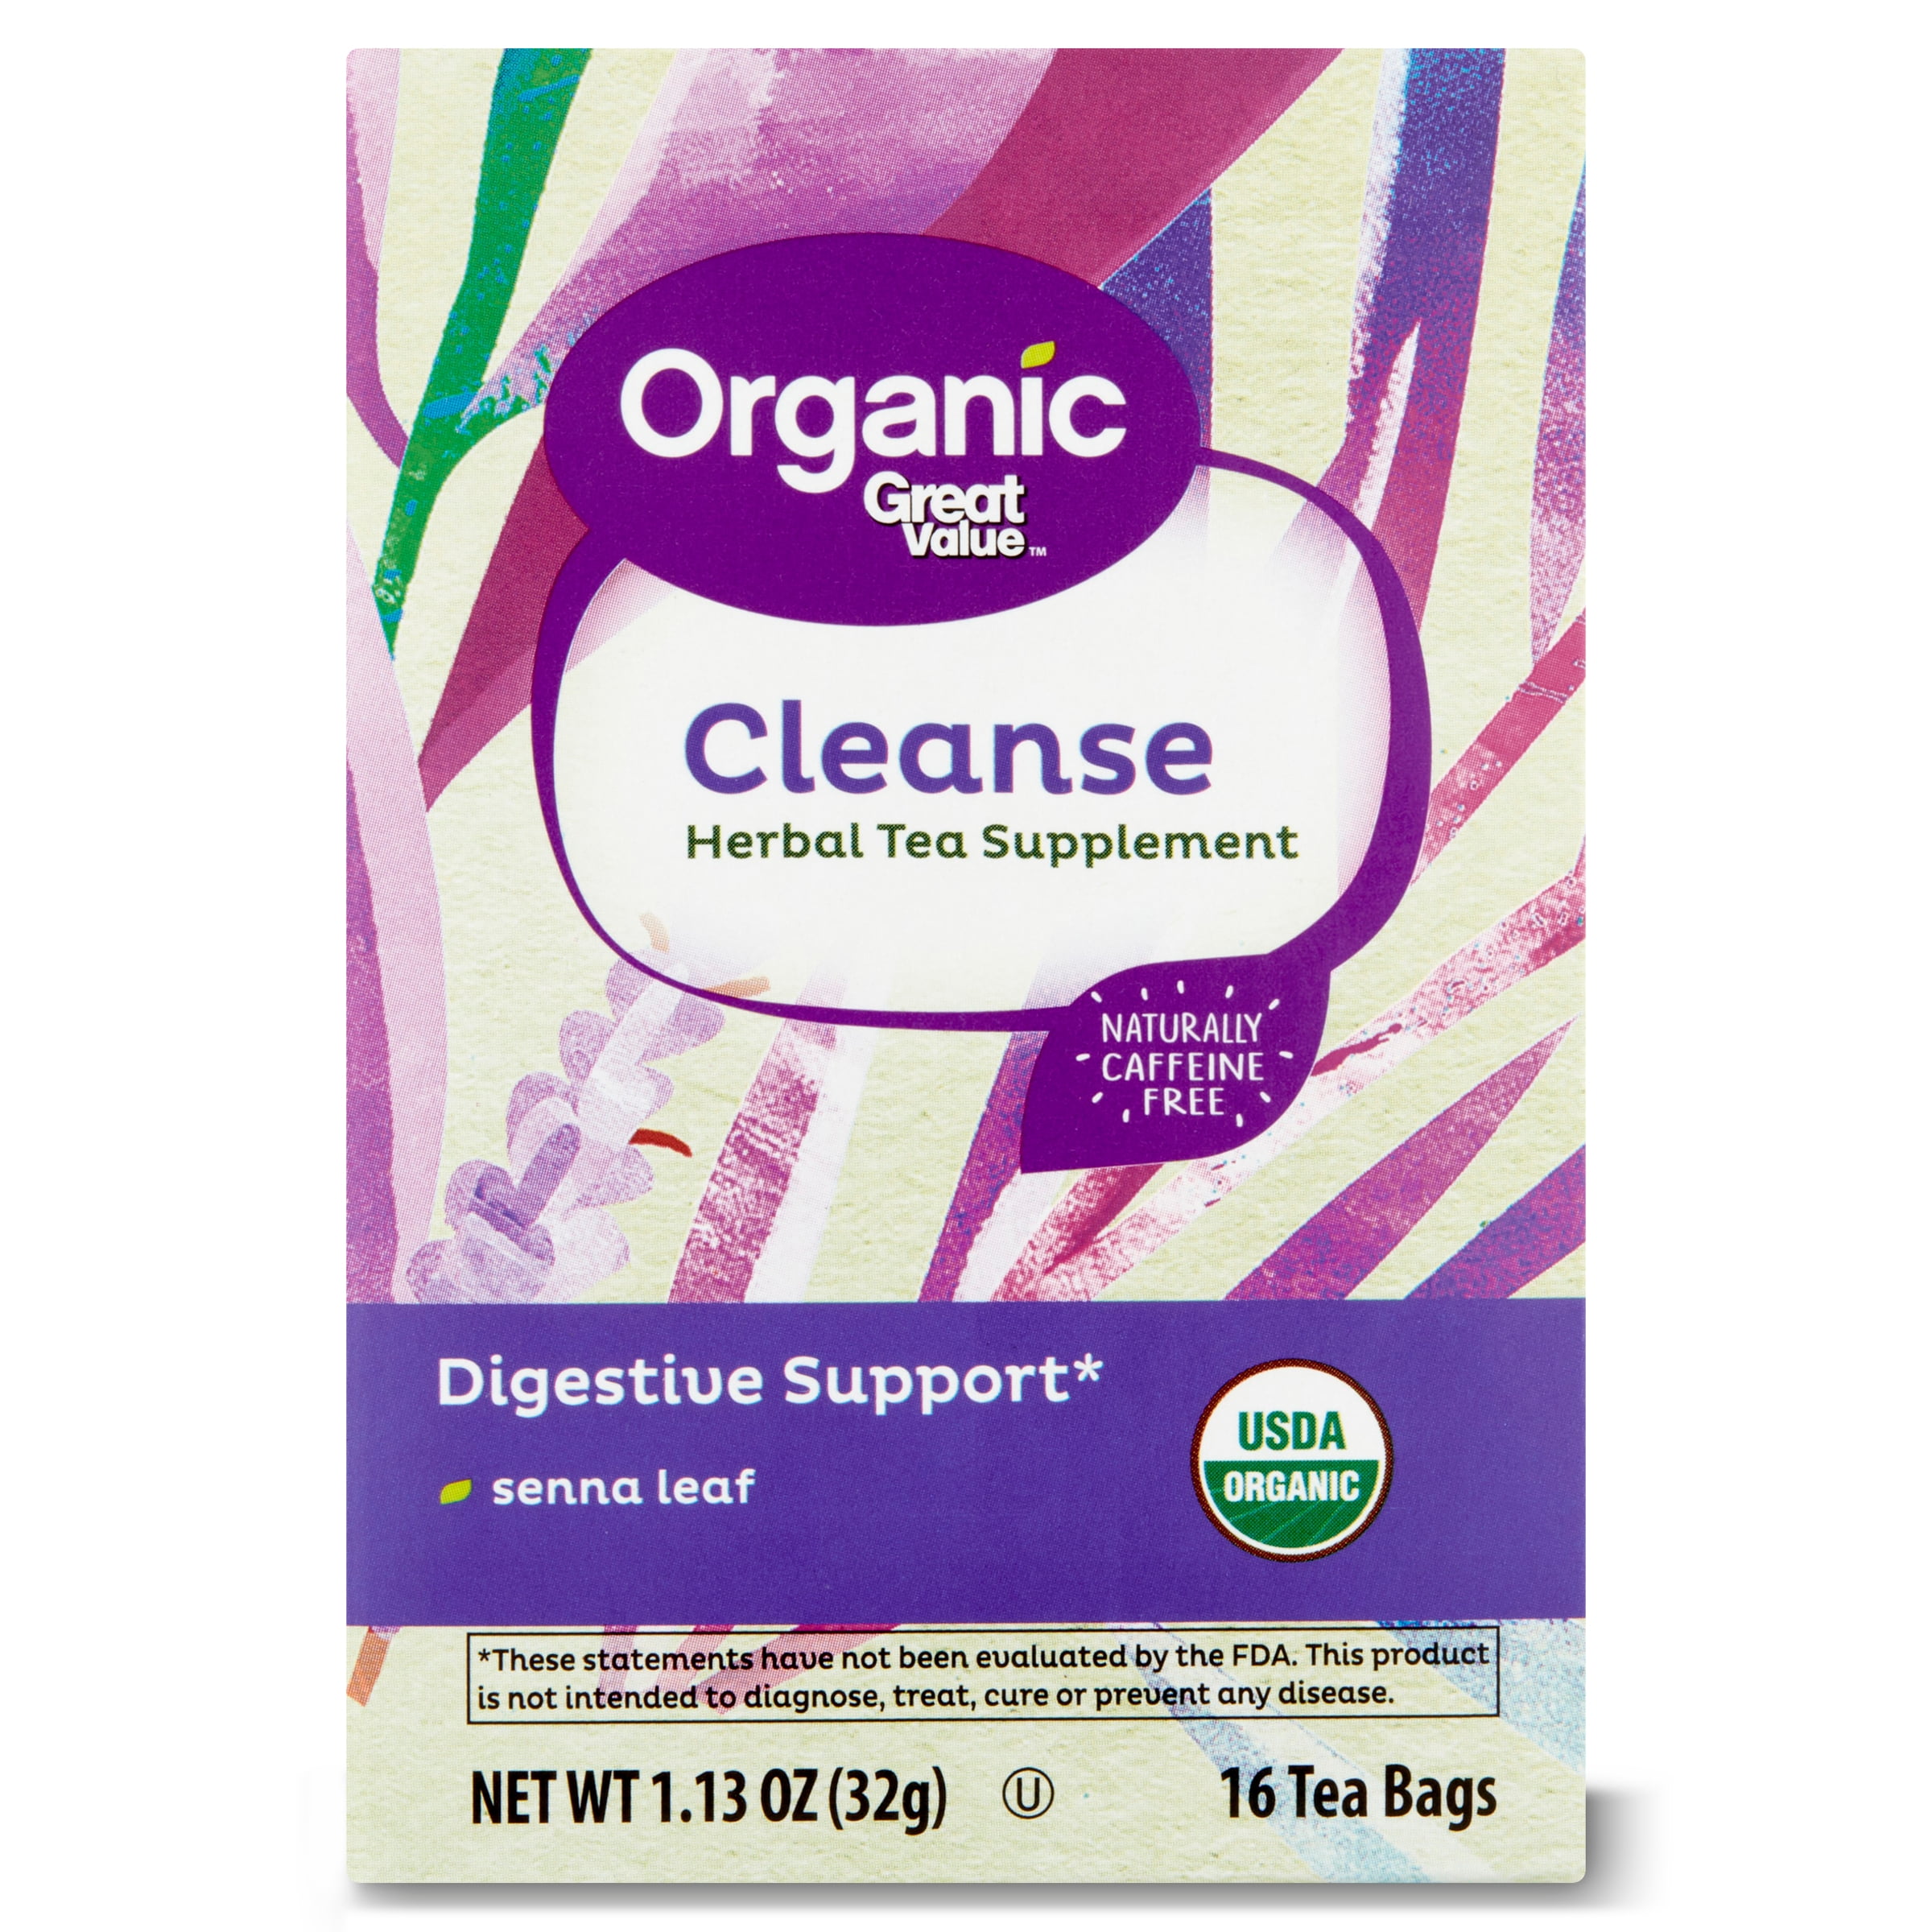 Great Value Organic Cleanse Tea Bags, 1.13 oz, 16 Ct